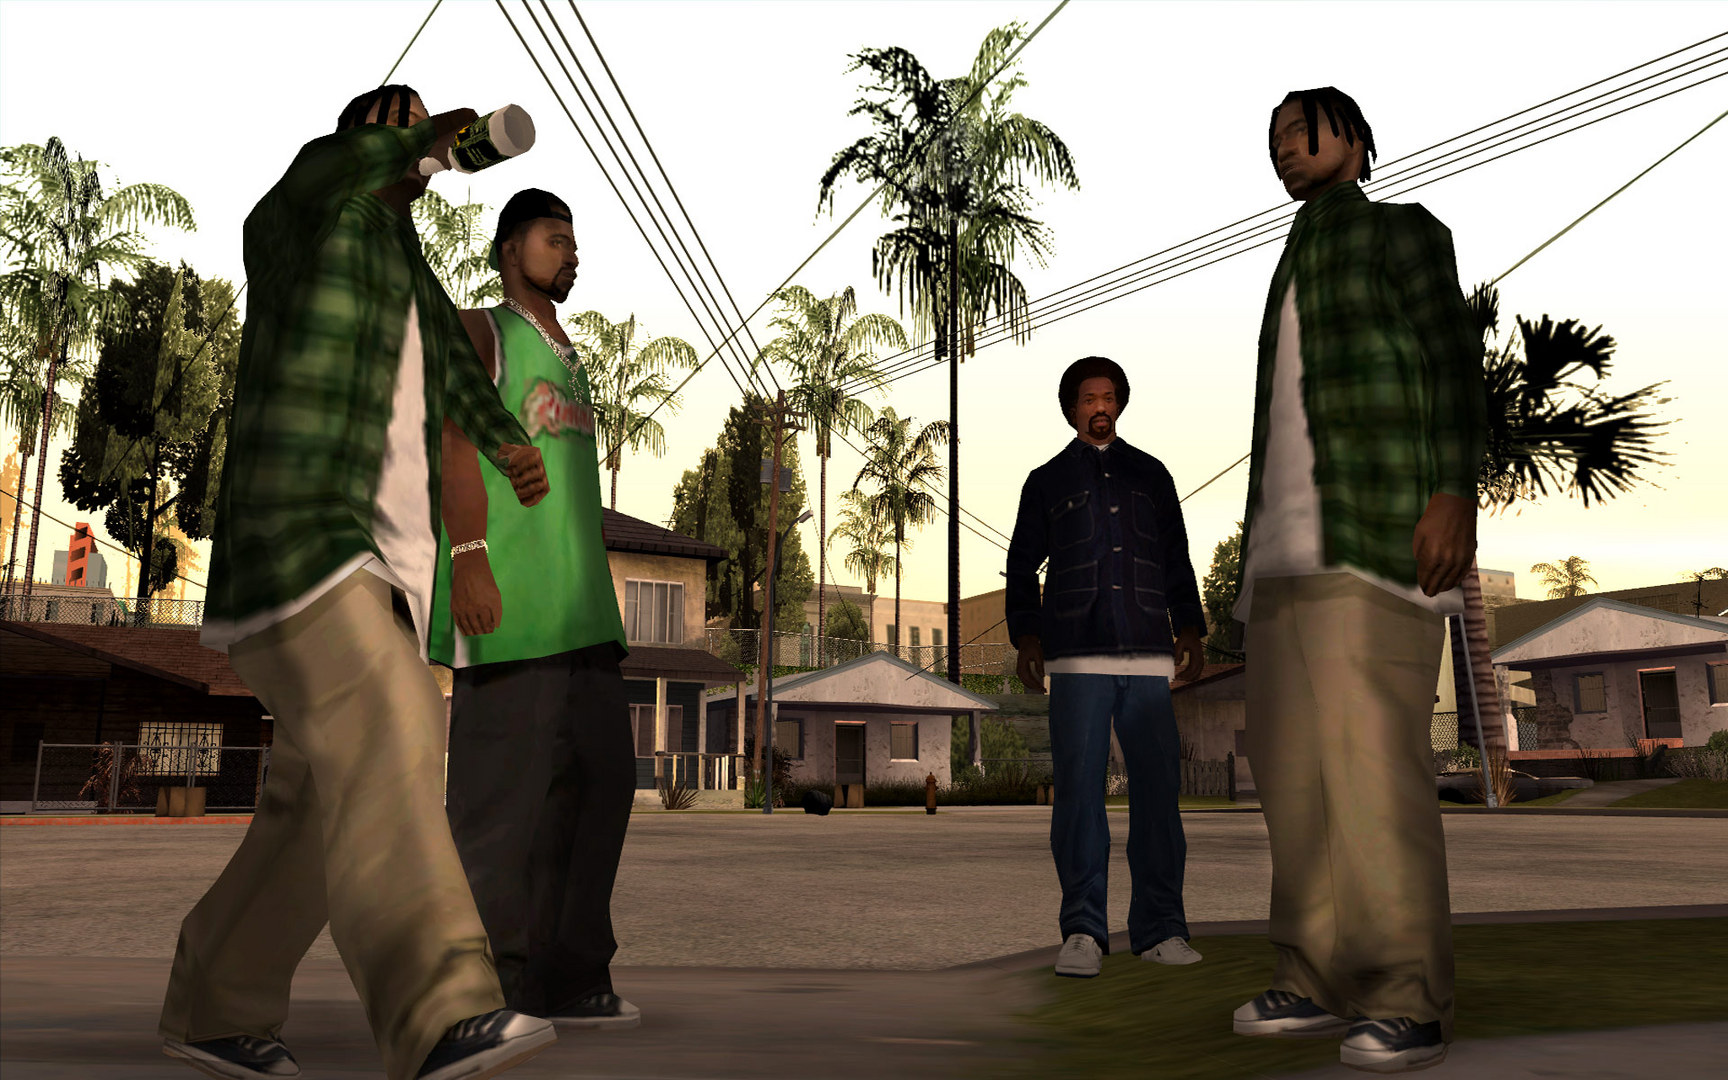 grand theft auto san andreas full game crack download